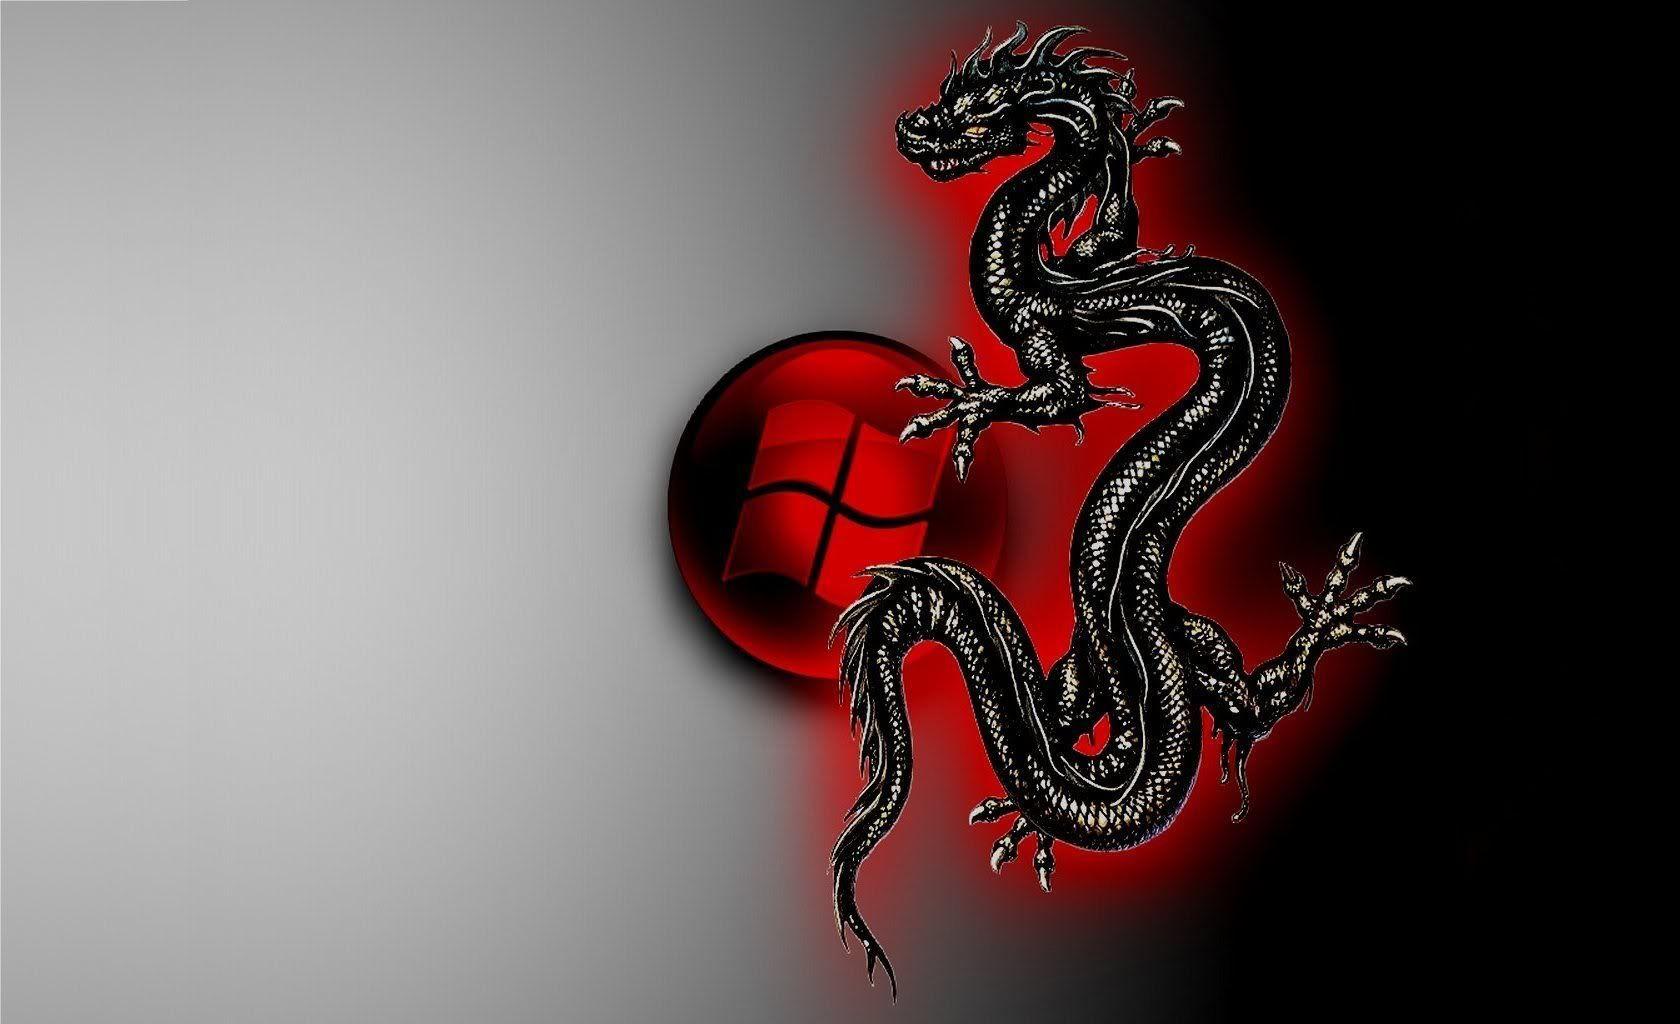 Outstanding Red Dragons wallpaper. Red Dragons wallpaper